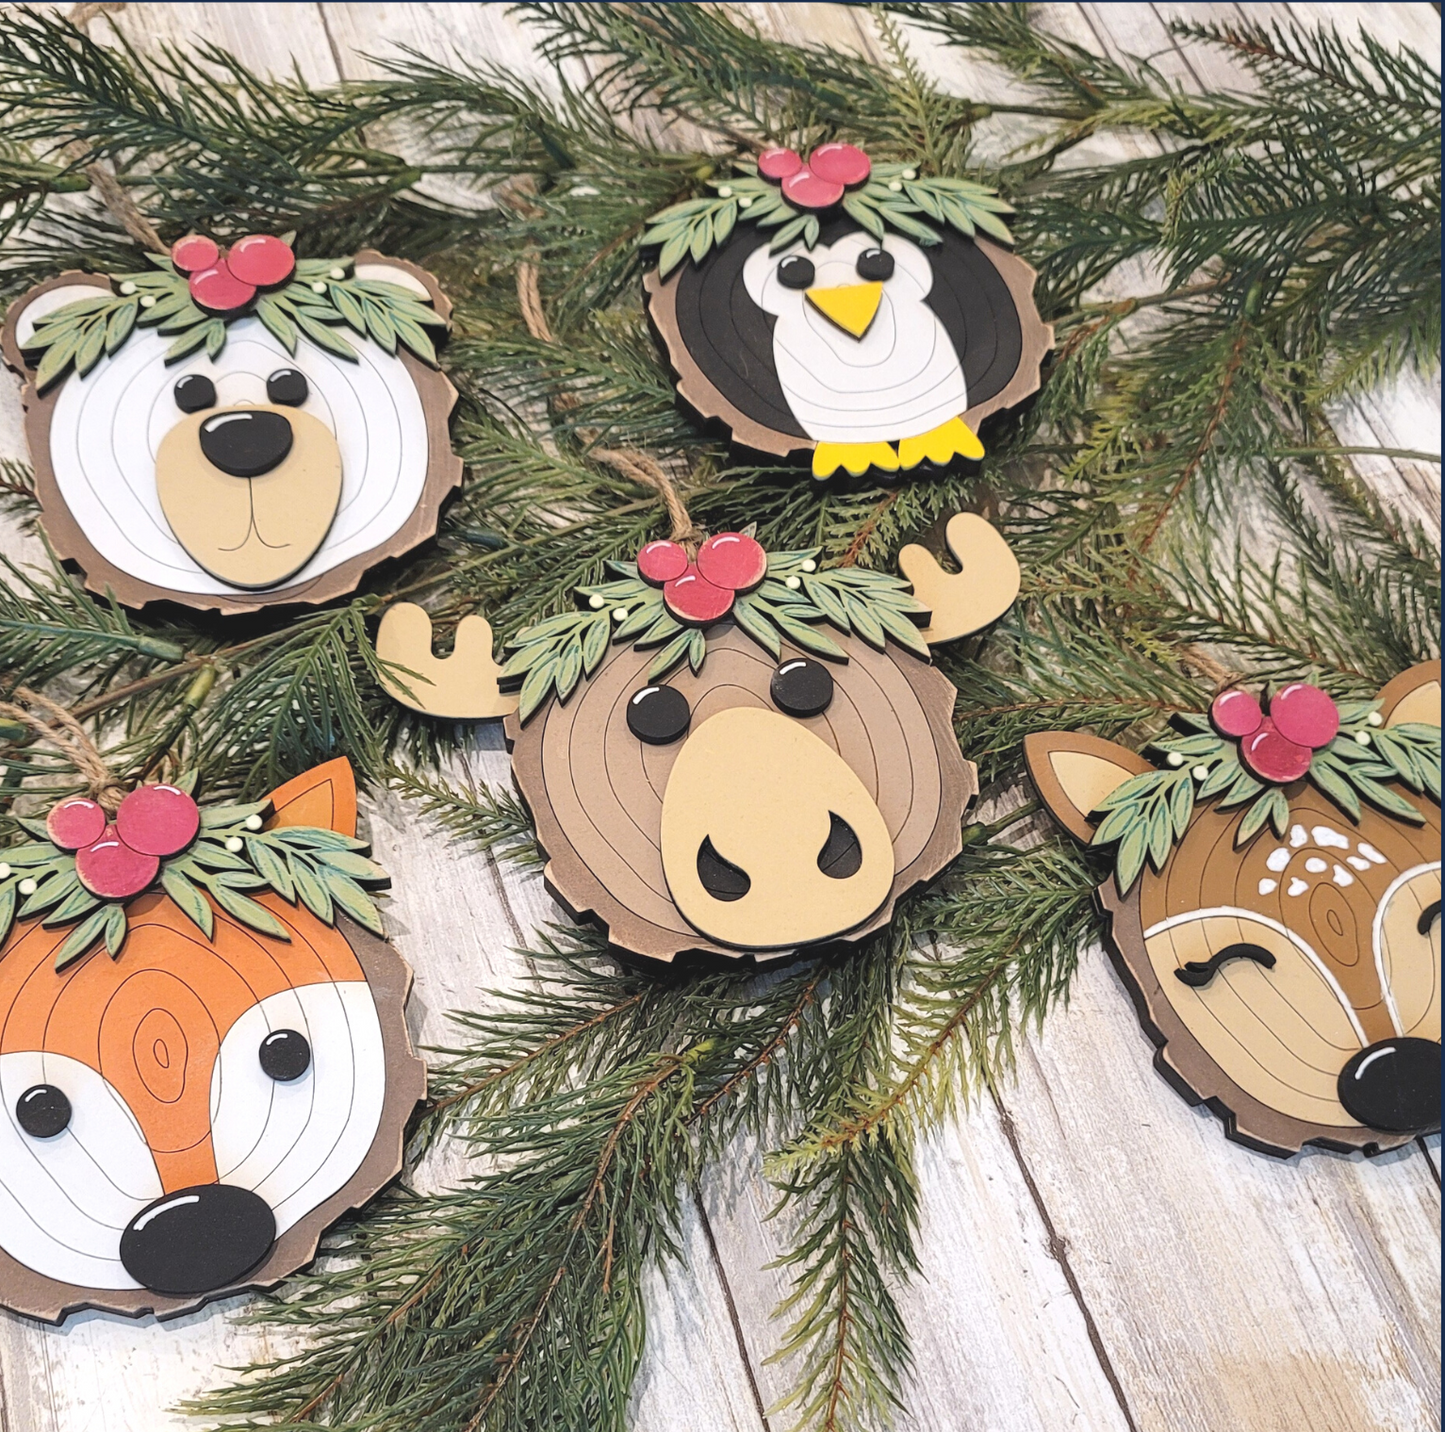 DIY Handcrafted Wood Slice Animal Ornaments - Christmas and Year Round Display